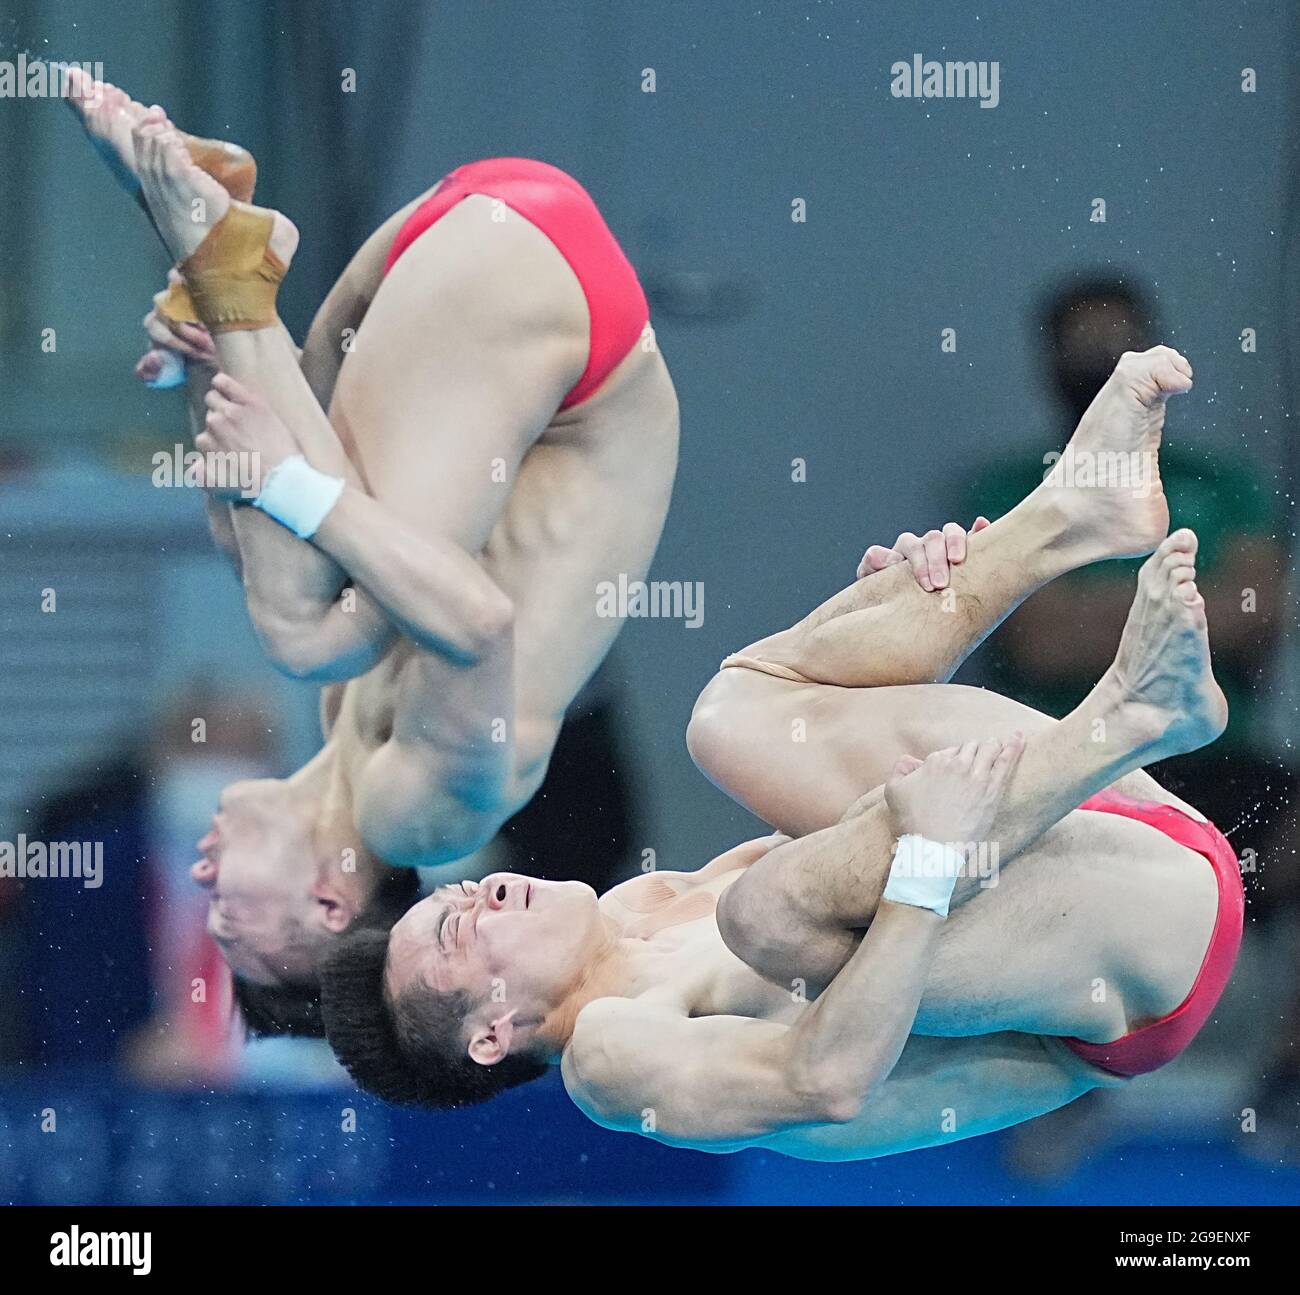 Tokio, Japan. 26th July, 2021. Swimming: Olympics, preliminaries, water diving - synchronised 10m, men at Tokyo Aquatics Centre. China's Cao Yuan and Chen Aisen in action. Credit: Michael Kappeler/dpa/Alamy Live News Stock Photo